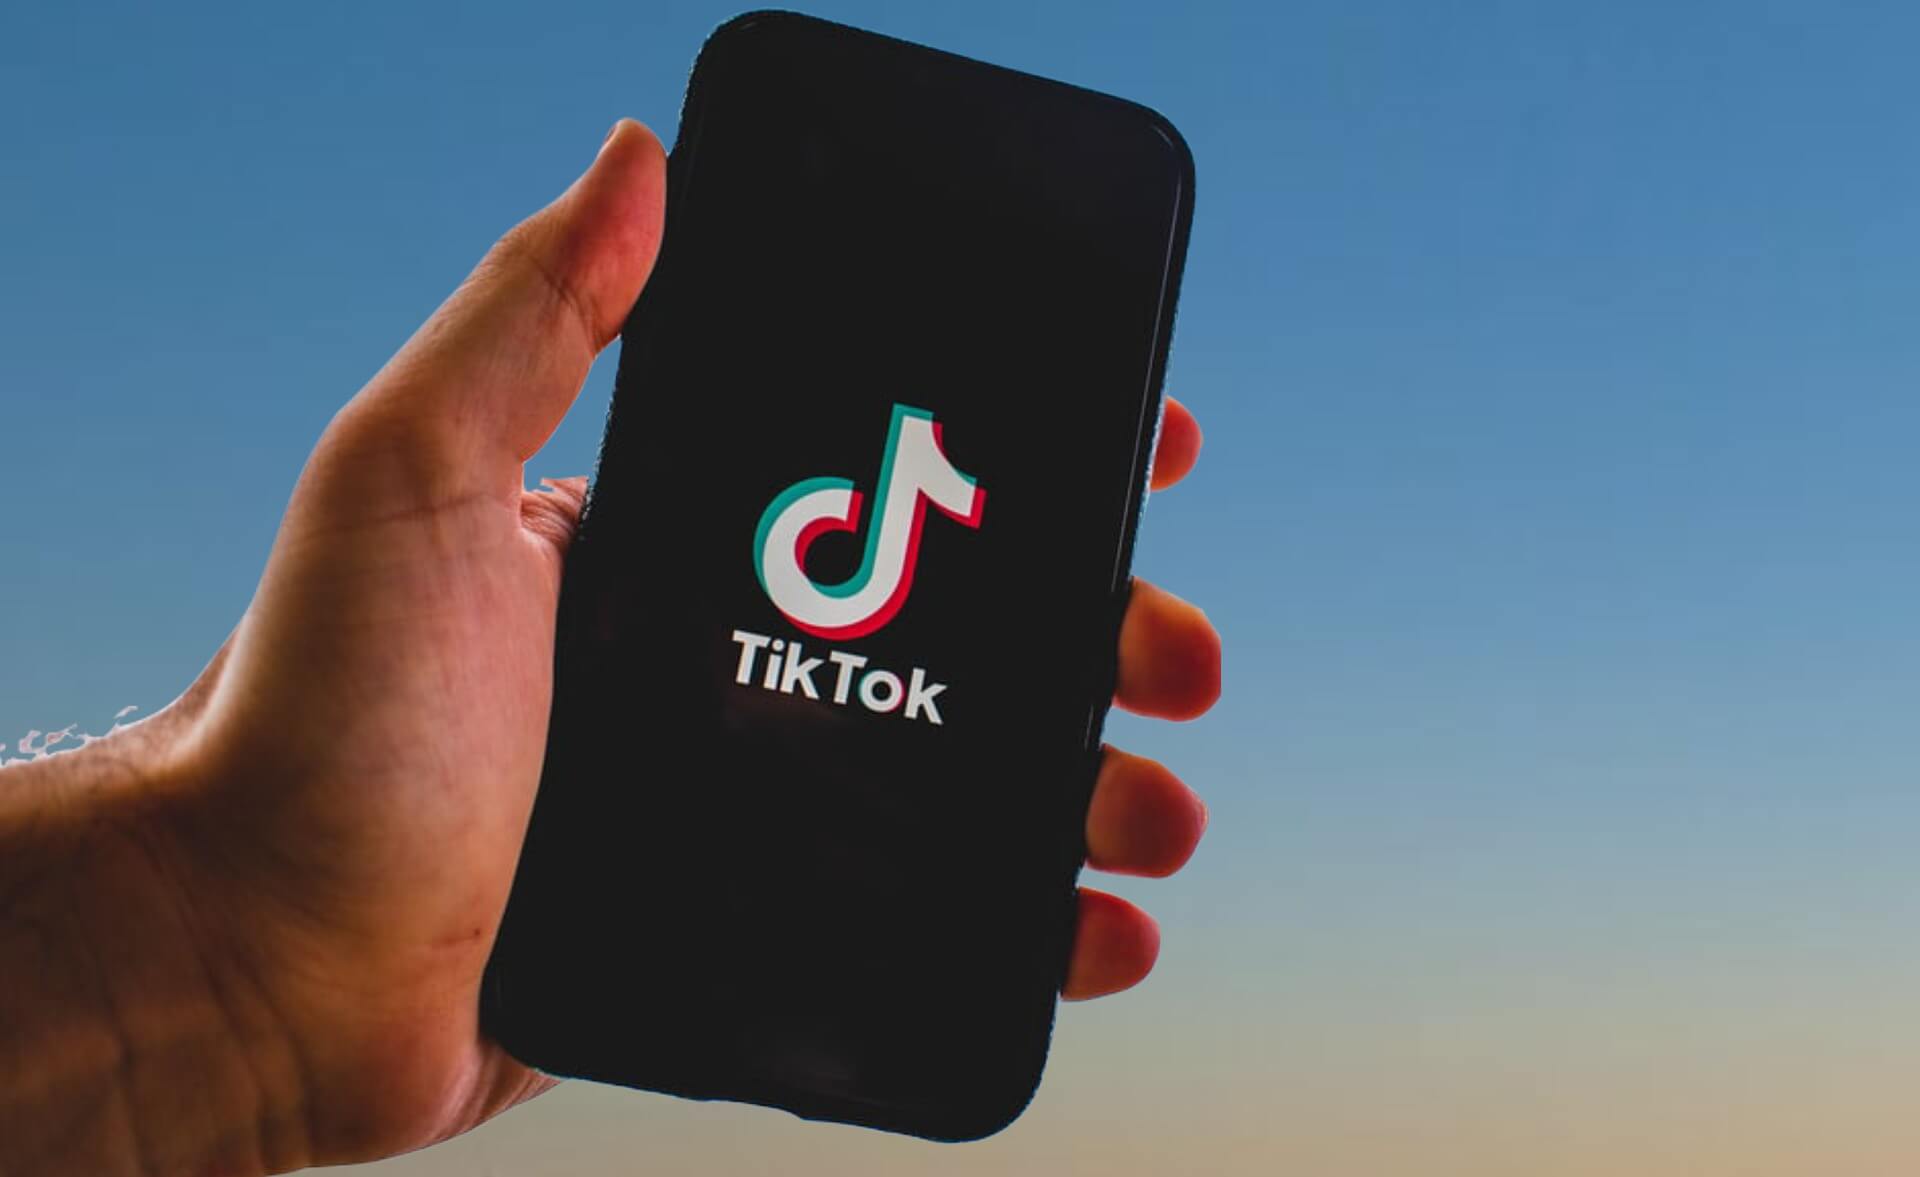 TikTok may sell itself to Microsoft to survive